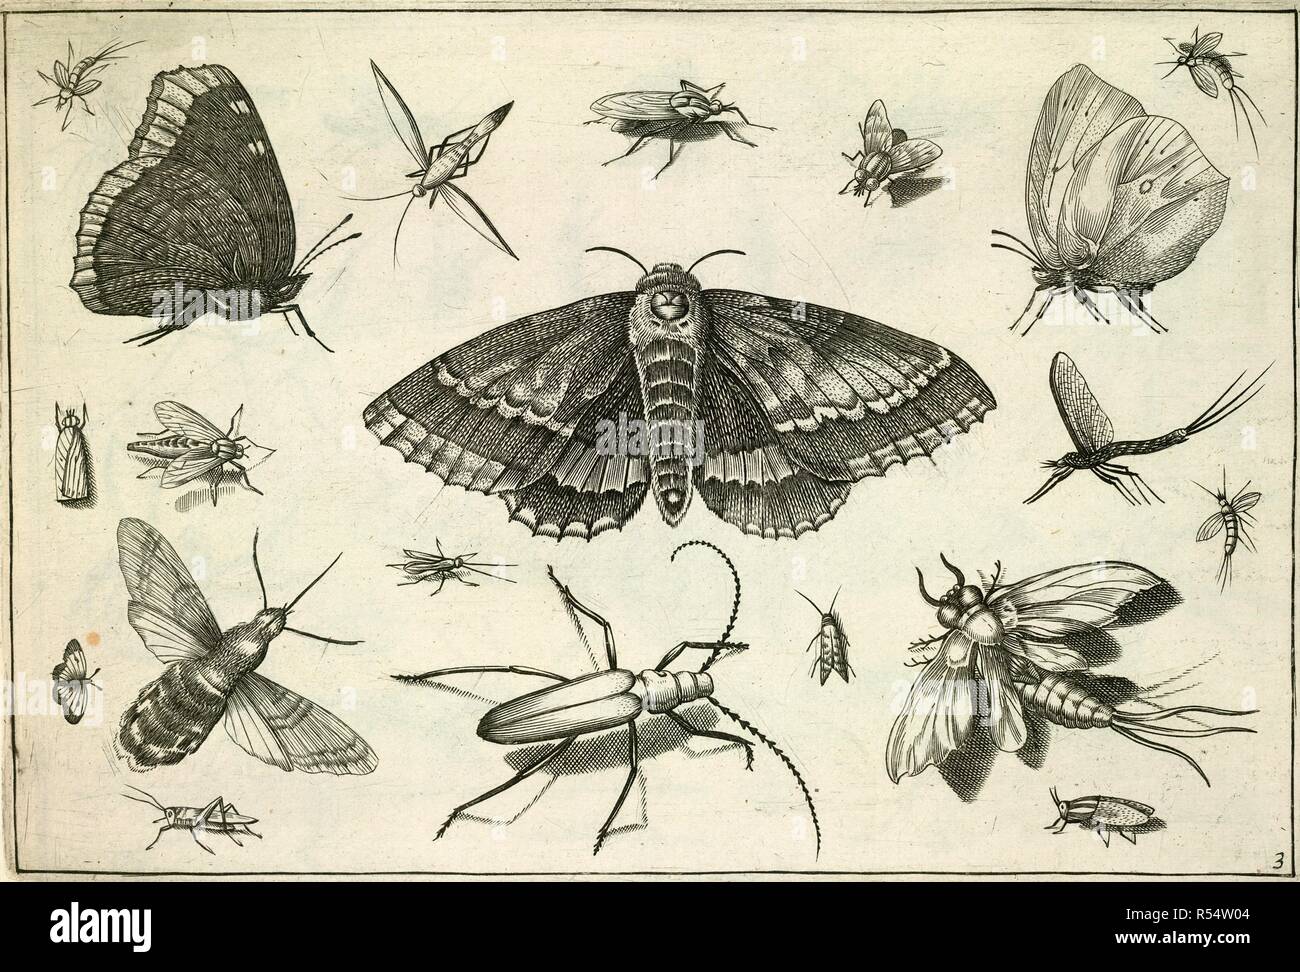 Insects. DiversÃ¦ insectarum volatilium icones ad vivum accu. Amsterdam, 1630. Various insects can be seen such as a moth, fly, grasshopper and butterfly.  Image taken from DiversÃ¦ insectarum volatilium icones ad vivum accuratissime depictÃ¦ per J. H., mandatÃ¦ a N. I. Visscher...  Originally published/produced in Amsterdam, 1630. . Source: C.175.m.32.(16), 3. Language: Dutch. Stock Photo